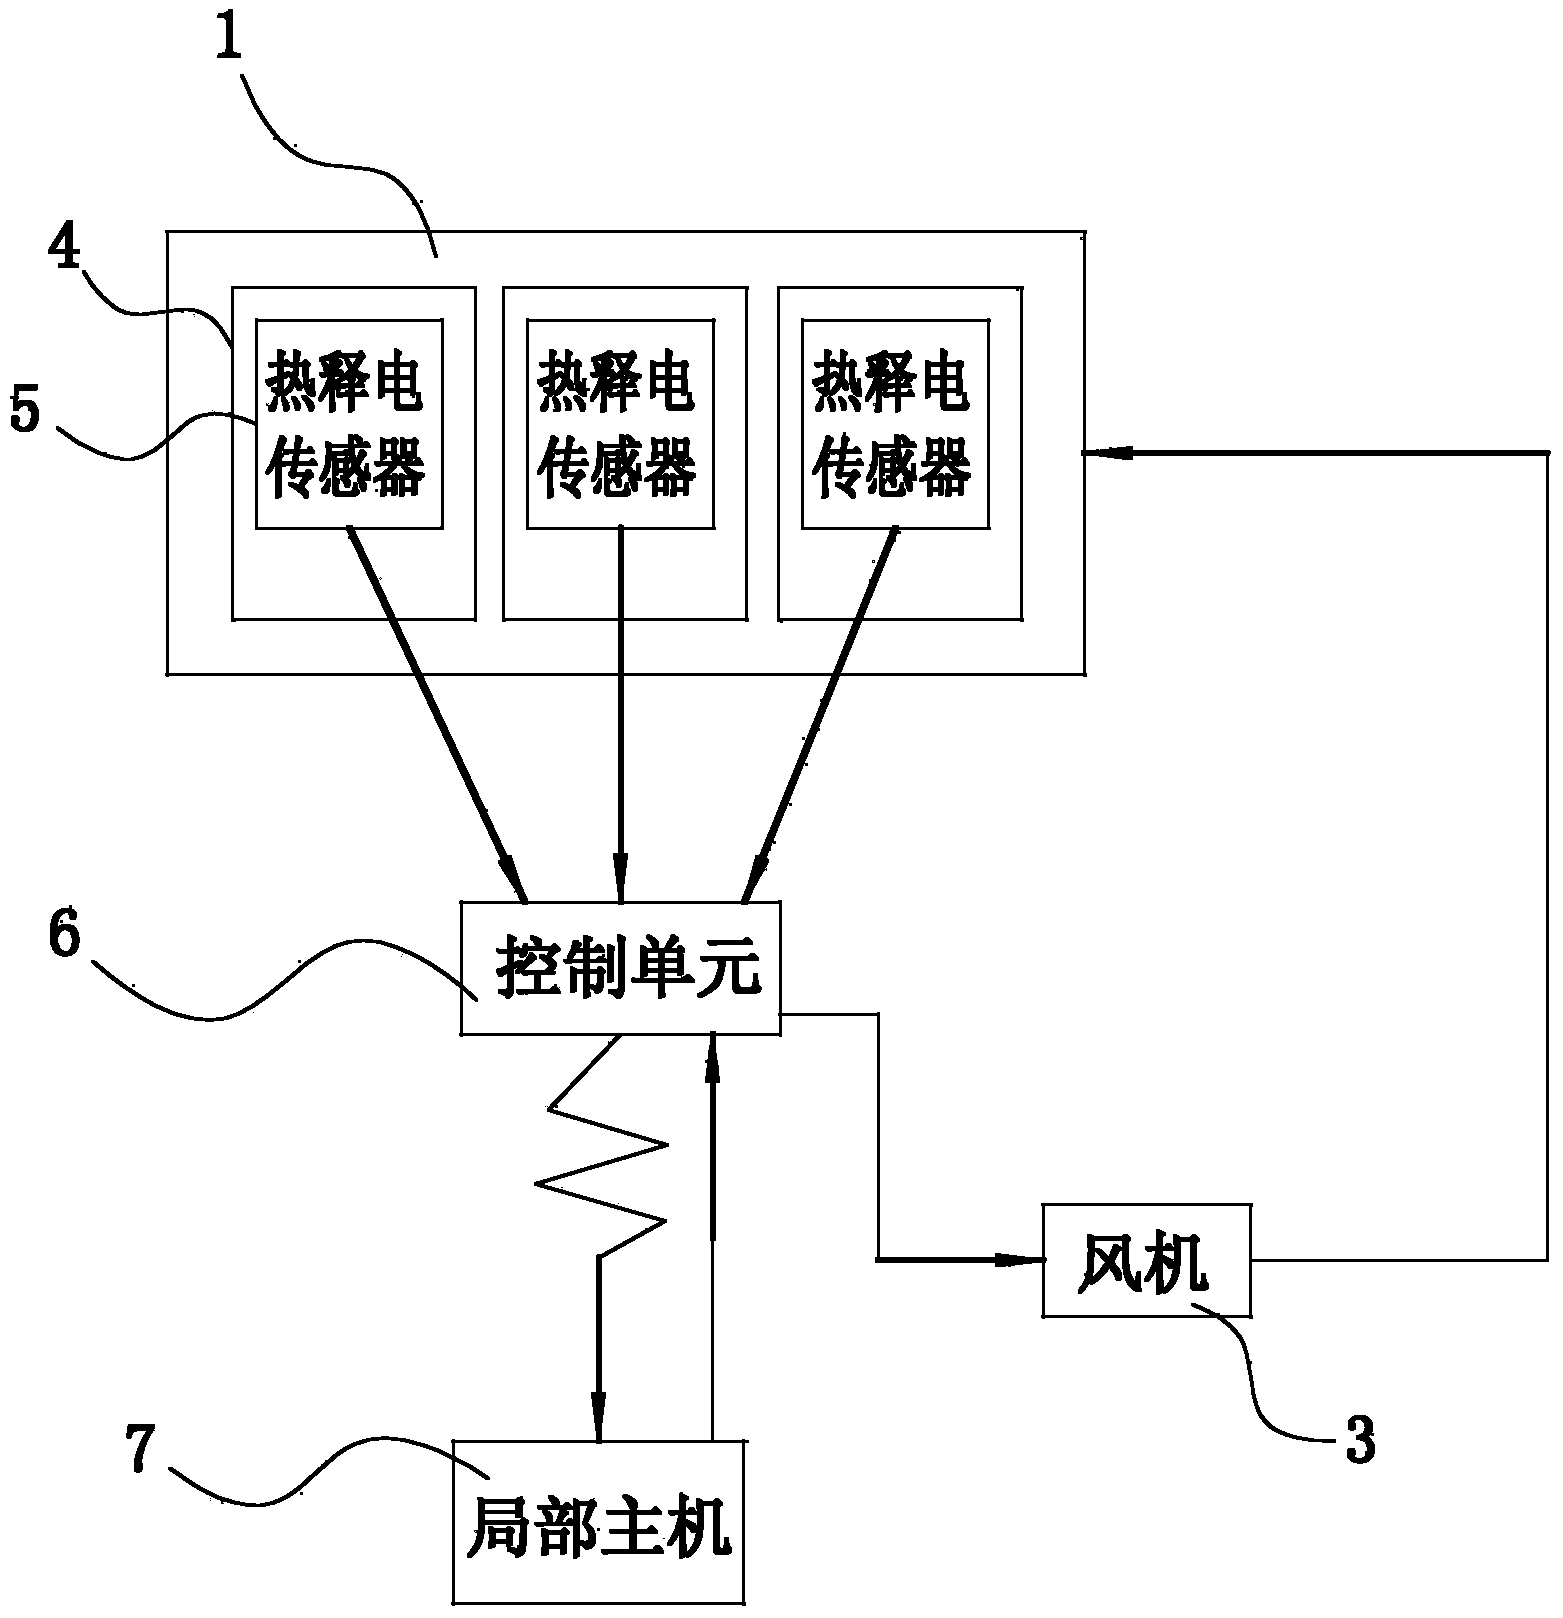 Local host temperature control system with guiding direction by temperature-measuring balls with built-in pyroelectric sensors